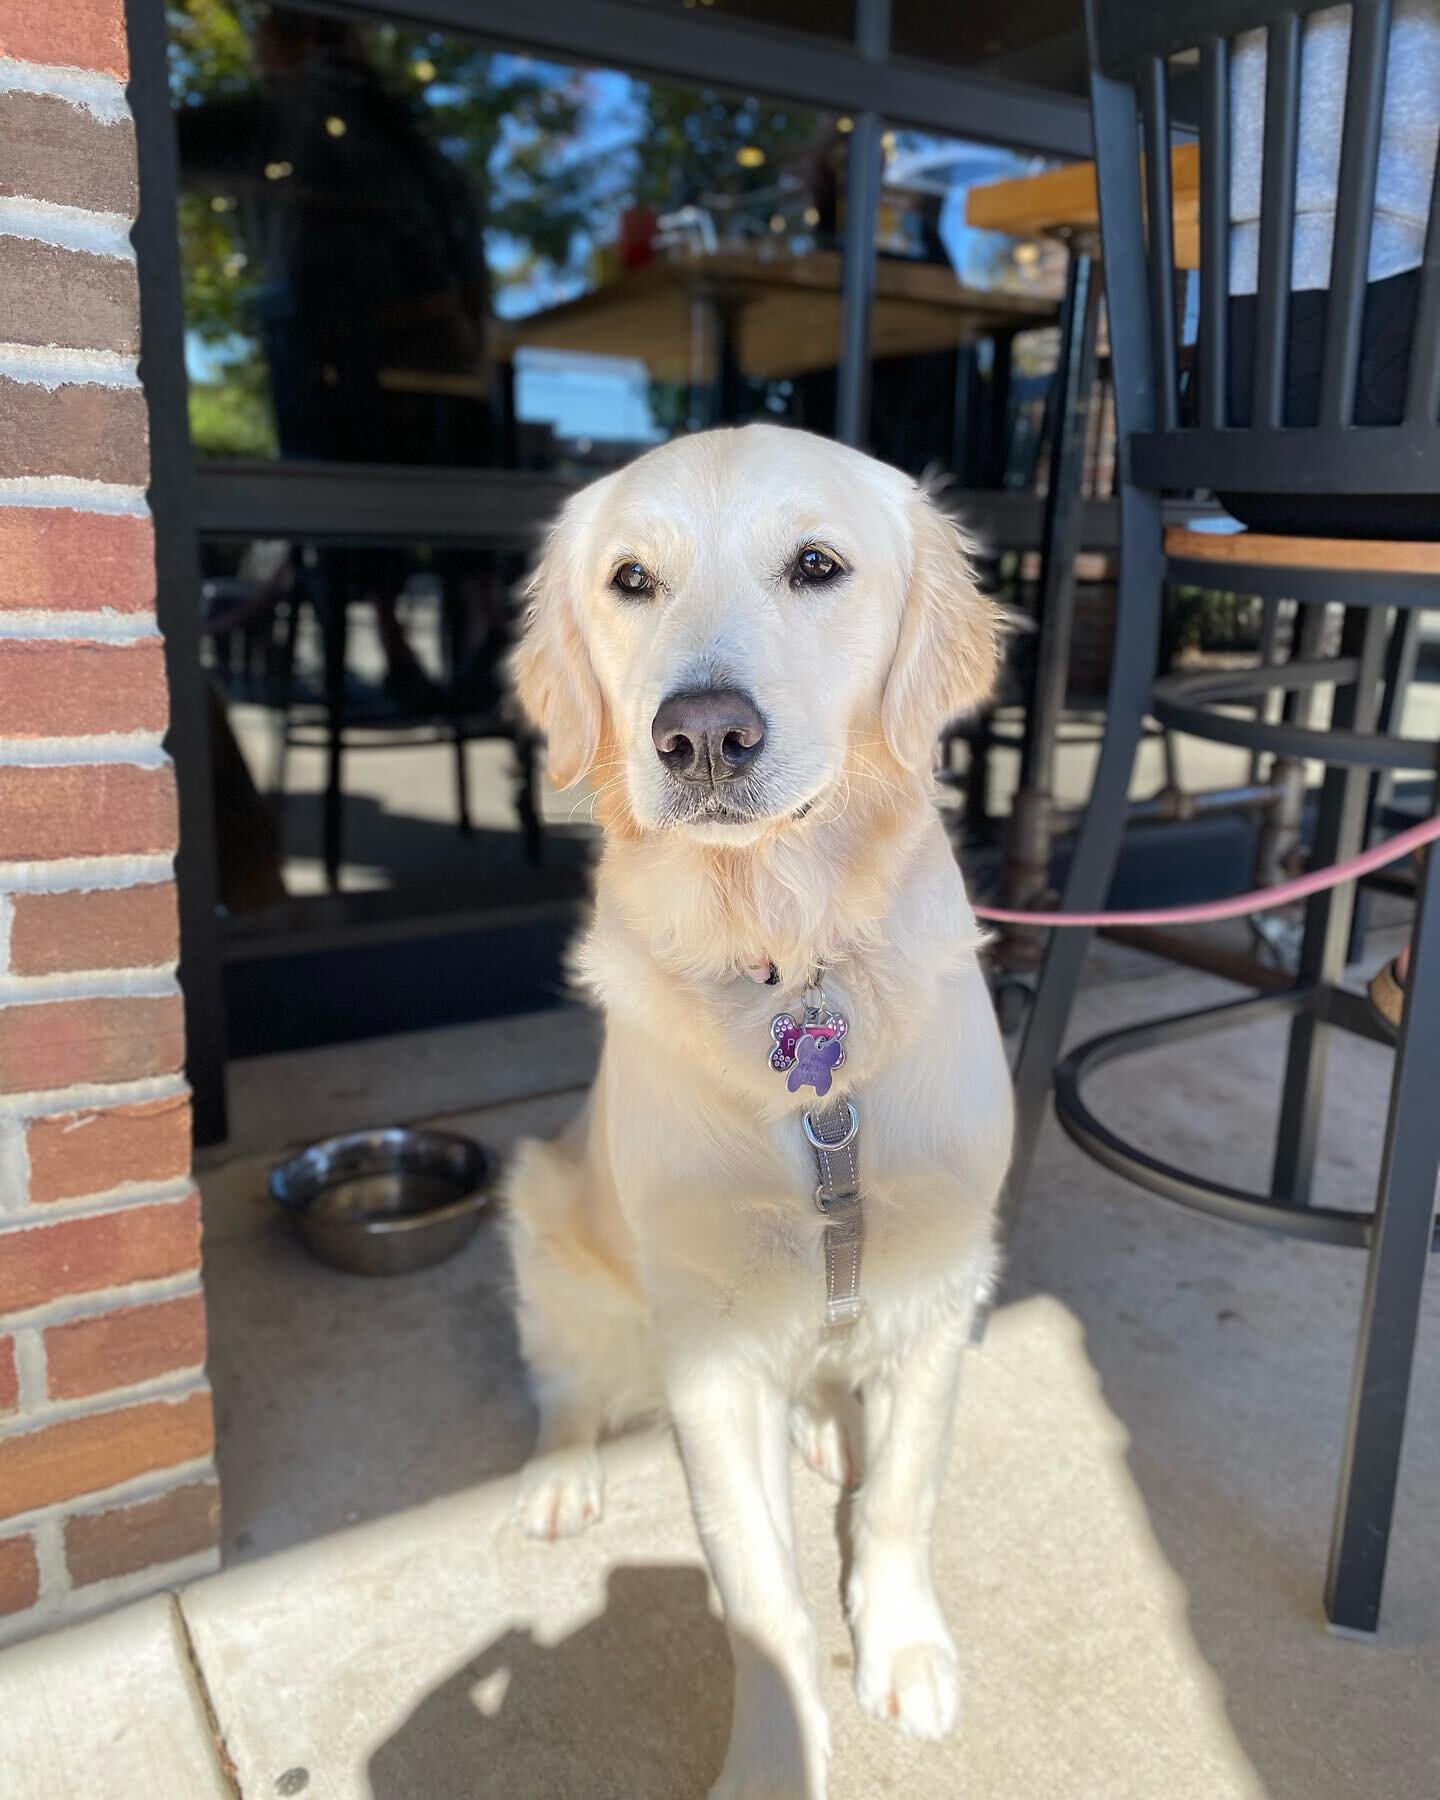 pups and patios 🐶☀️

poppy here wants you to know we are a dog friendly patio! ask your server for a water bowl next time you stop by!